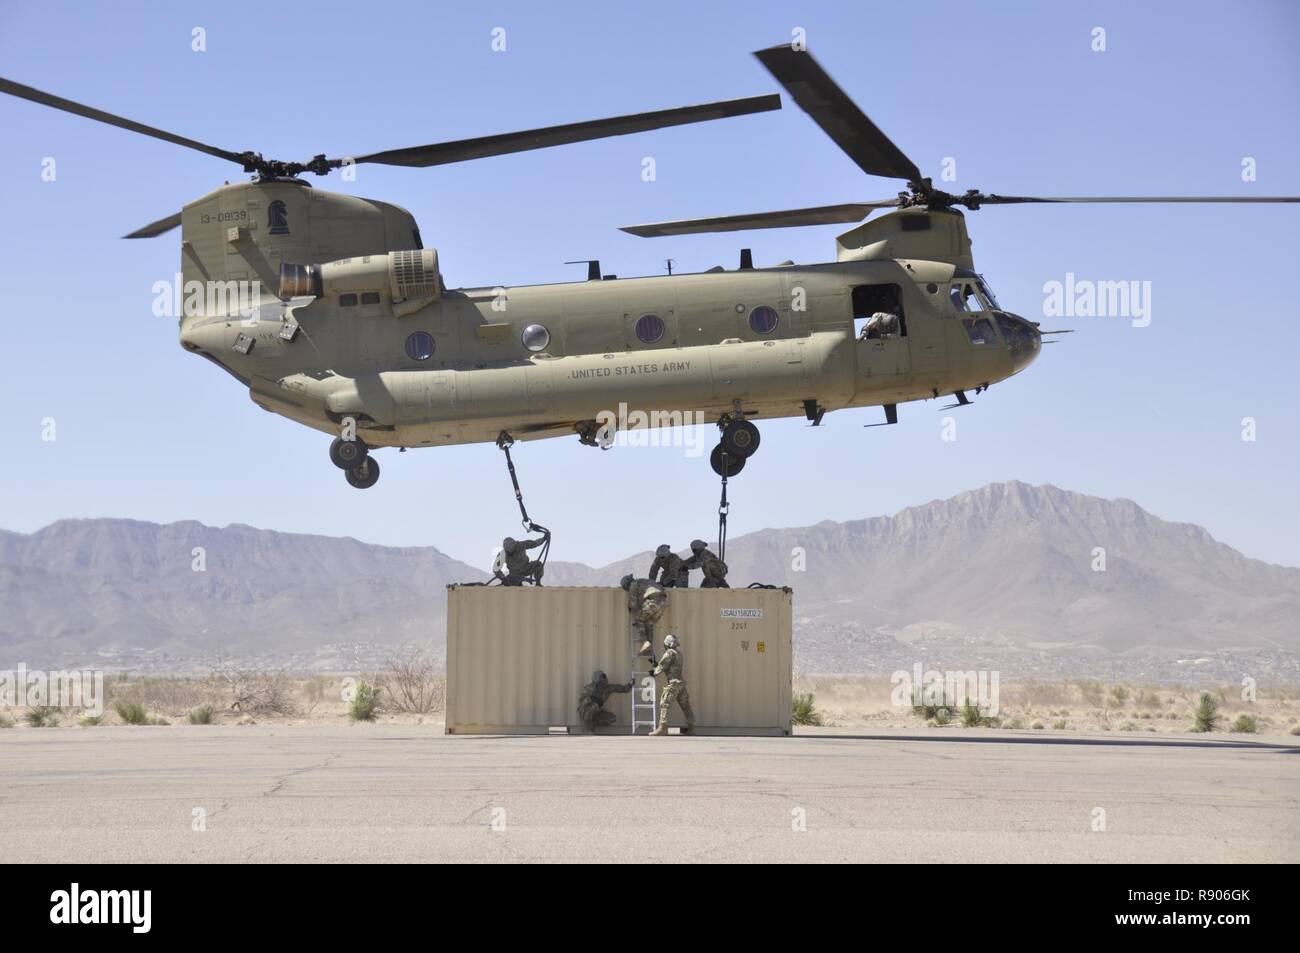 Soldiers assigned to Headquarters and Headquarters Company, Special Troops Battalion, 1st Armored Division Sustainment Brigade, attach a Conex box to a CH-47 Chinook during sling load training at Biggs Army Airfield, Fort Bliss, Texas, March 10, 2017. Stock Photo